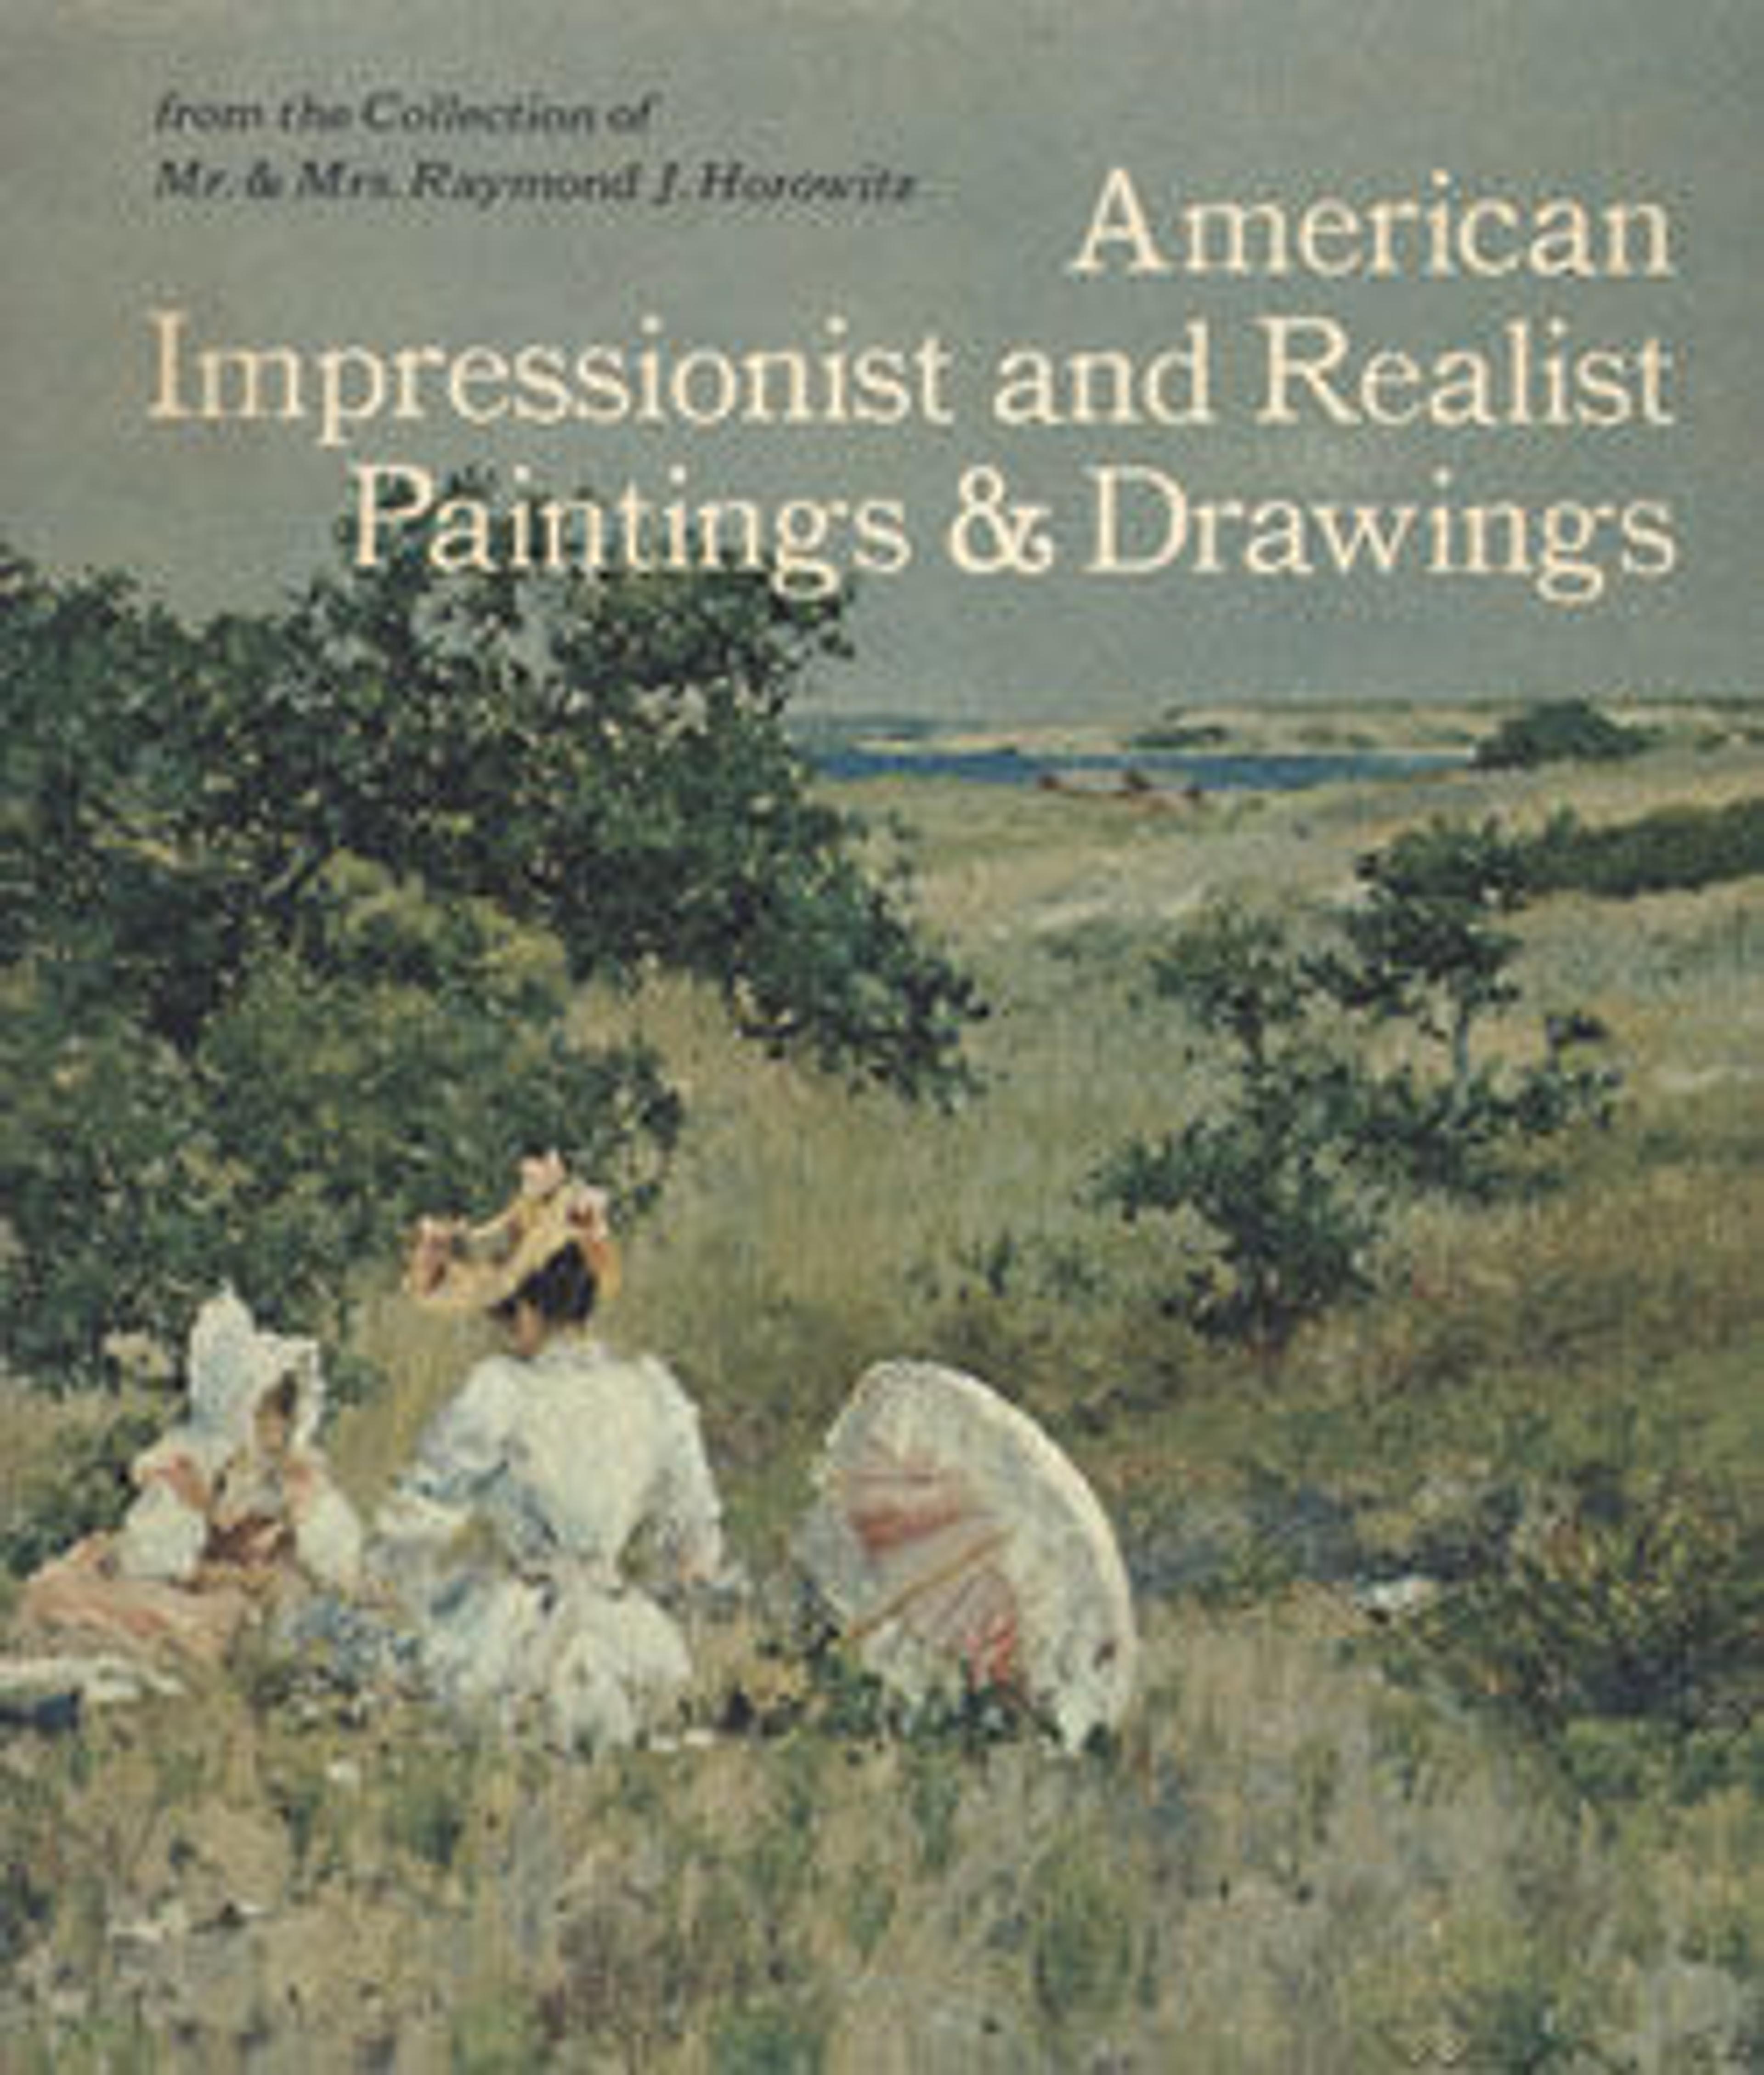 American Impressionist and Realist Paintings and Drawings from the Collection of Mr. and Mrs. Raymond J. Horowitz